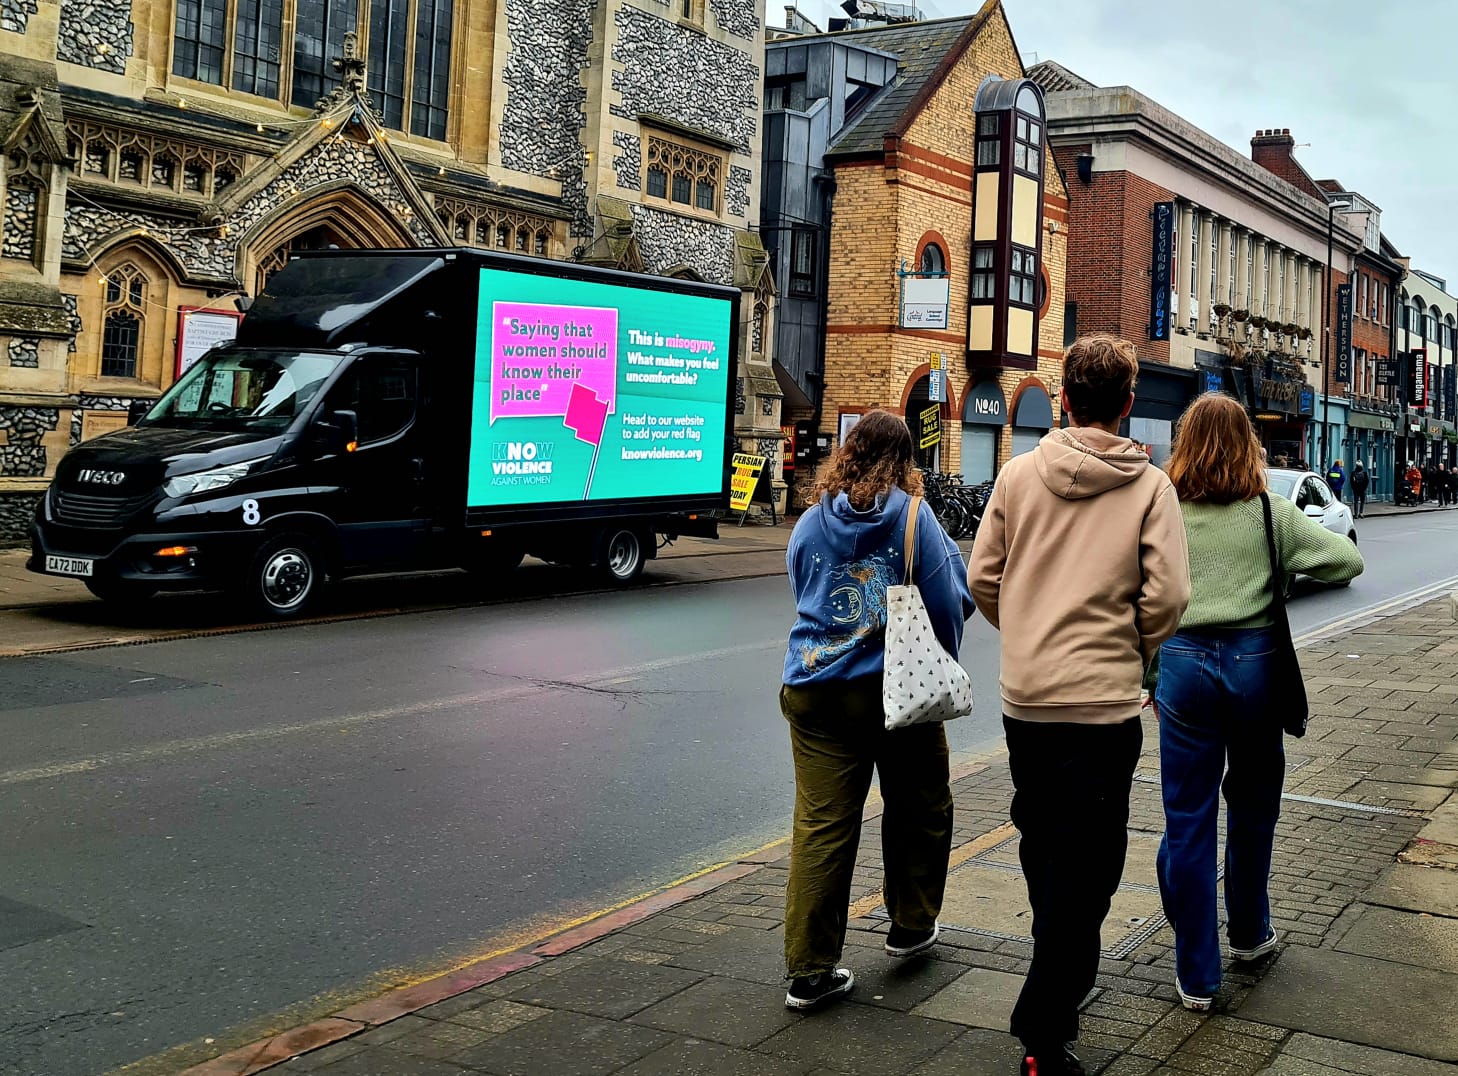 young people walking past and looking at ad van on side of road